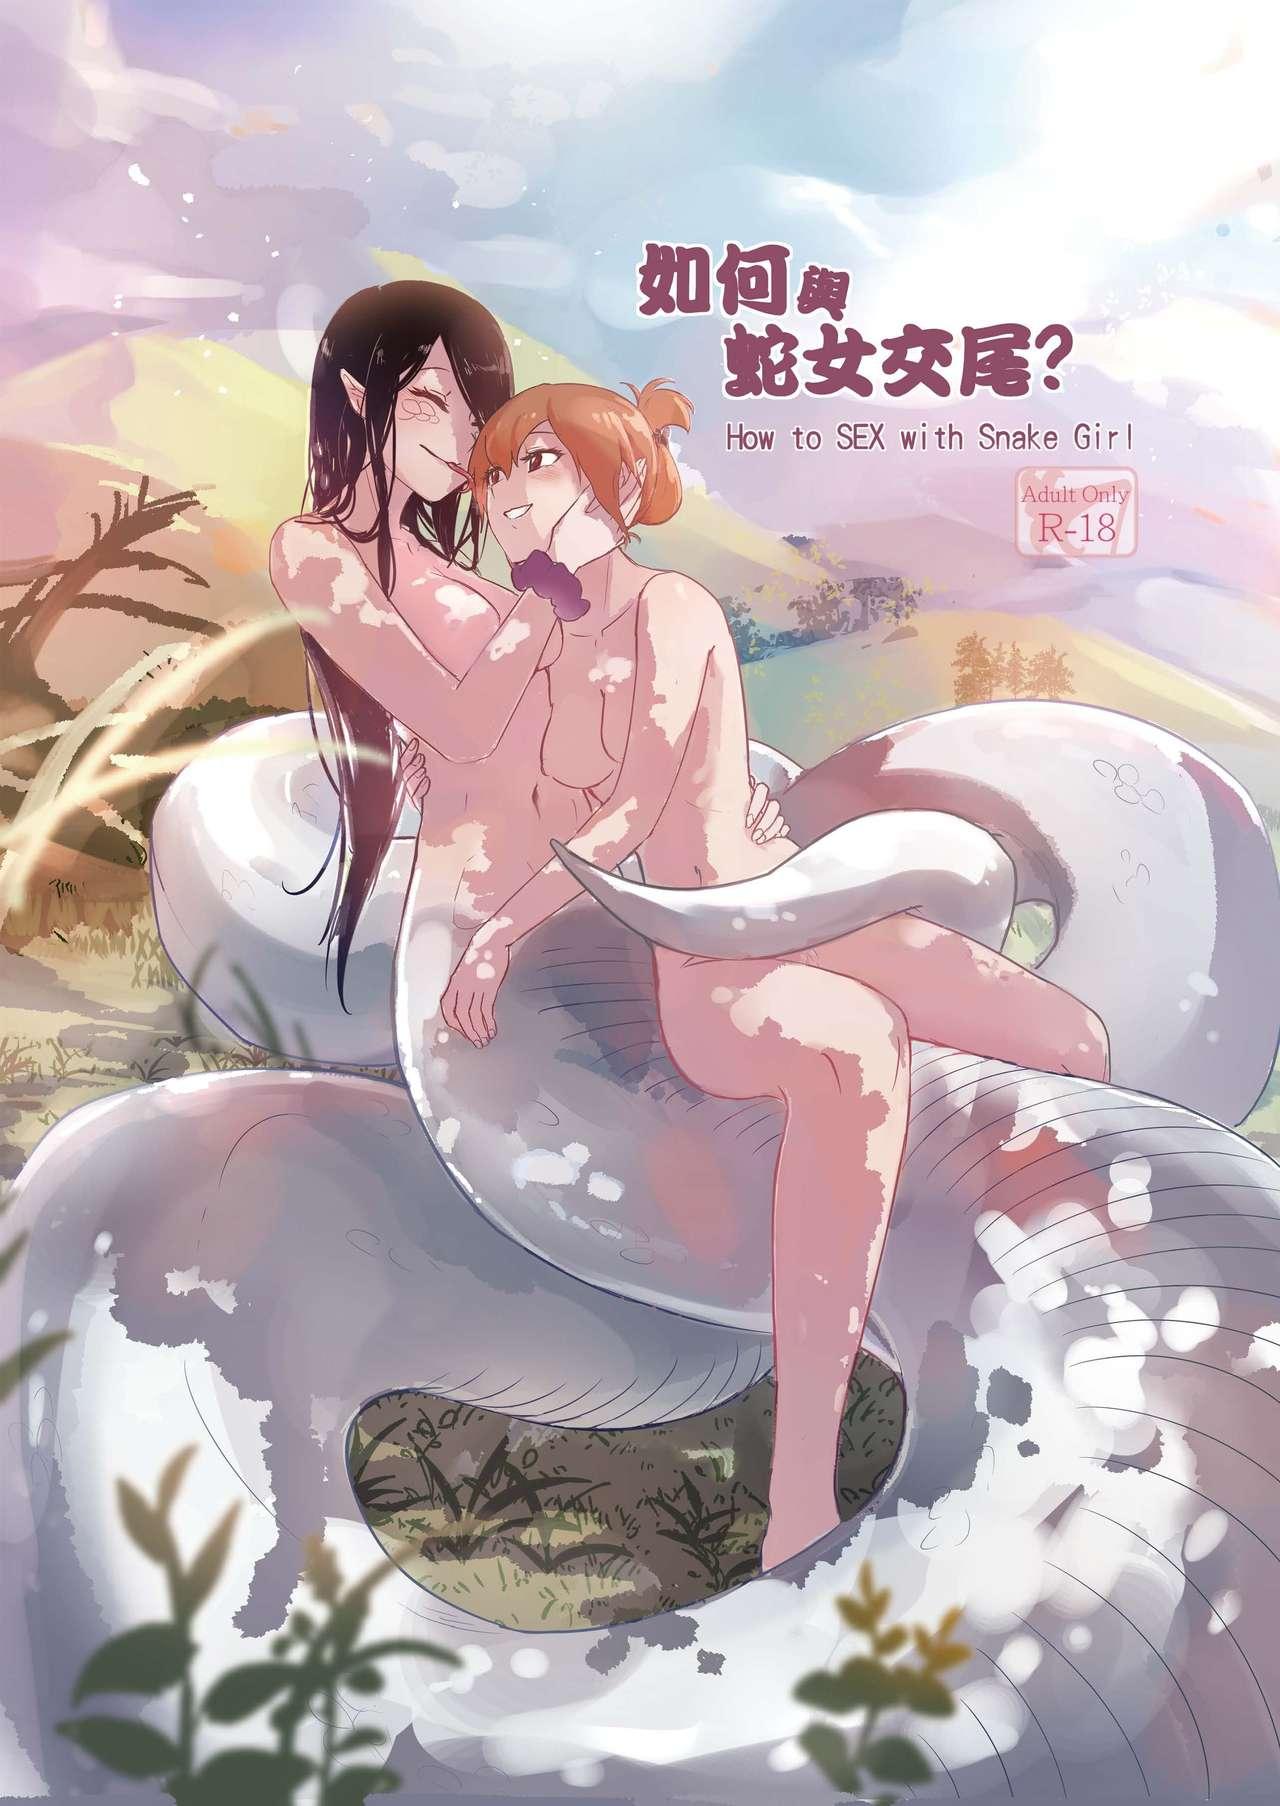 Verga How to Sex with Snake Girl | 如何與蛇女交尾 | 蛇女と交尾する方法は - Original Freeteenporn - Page 1